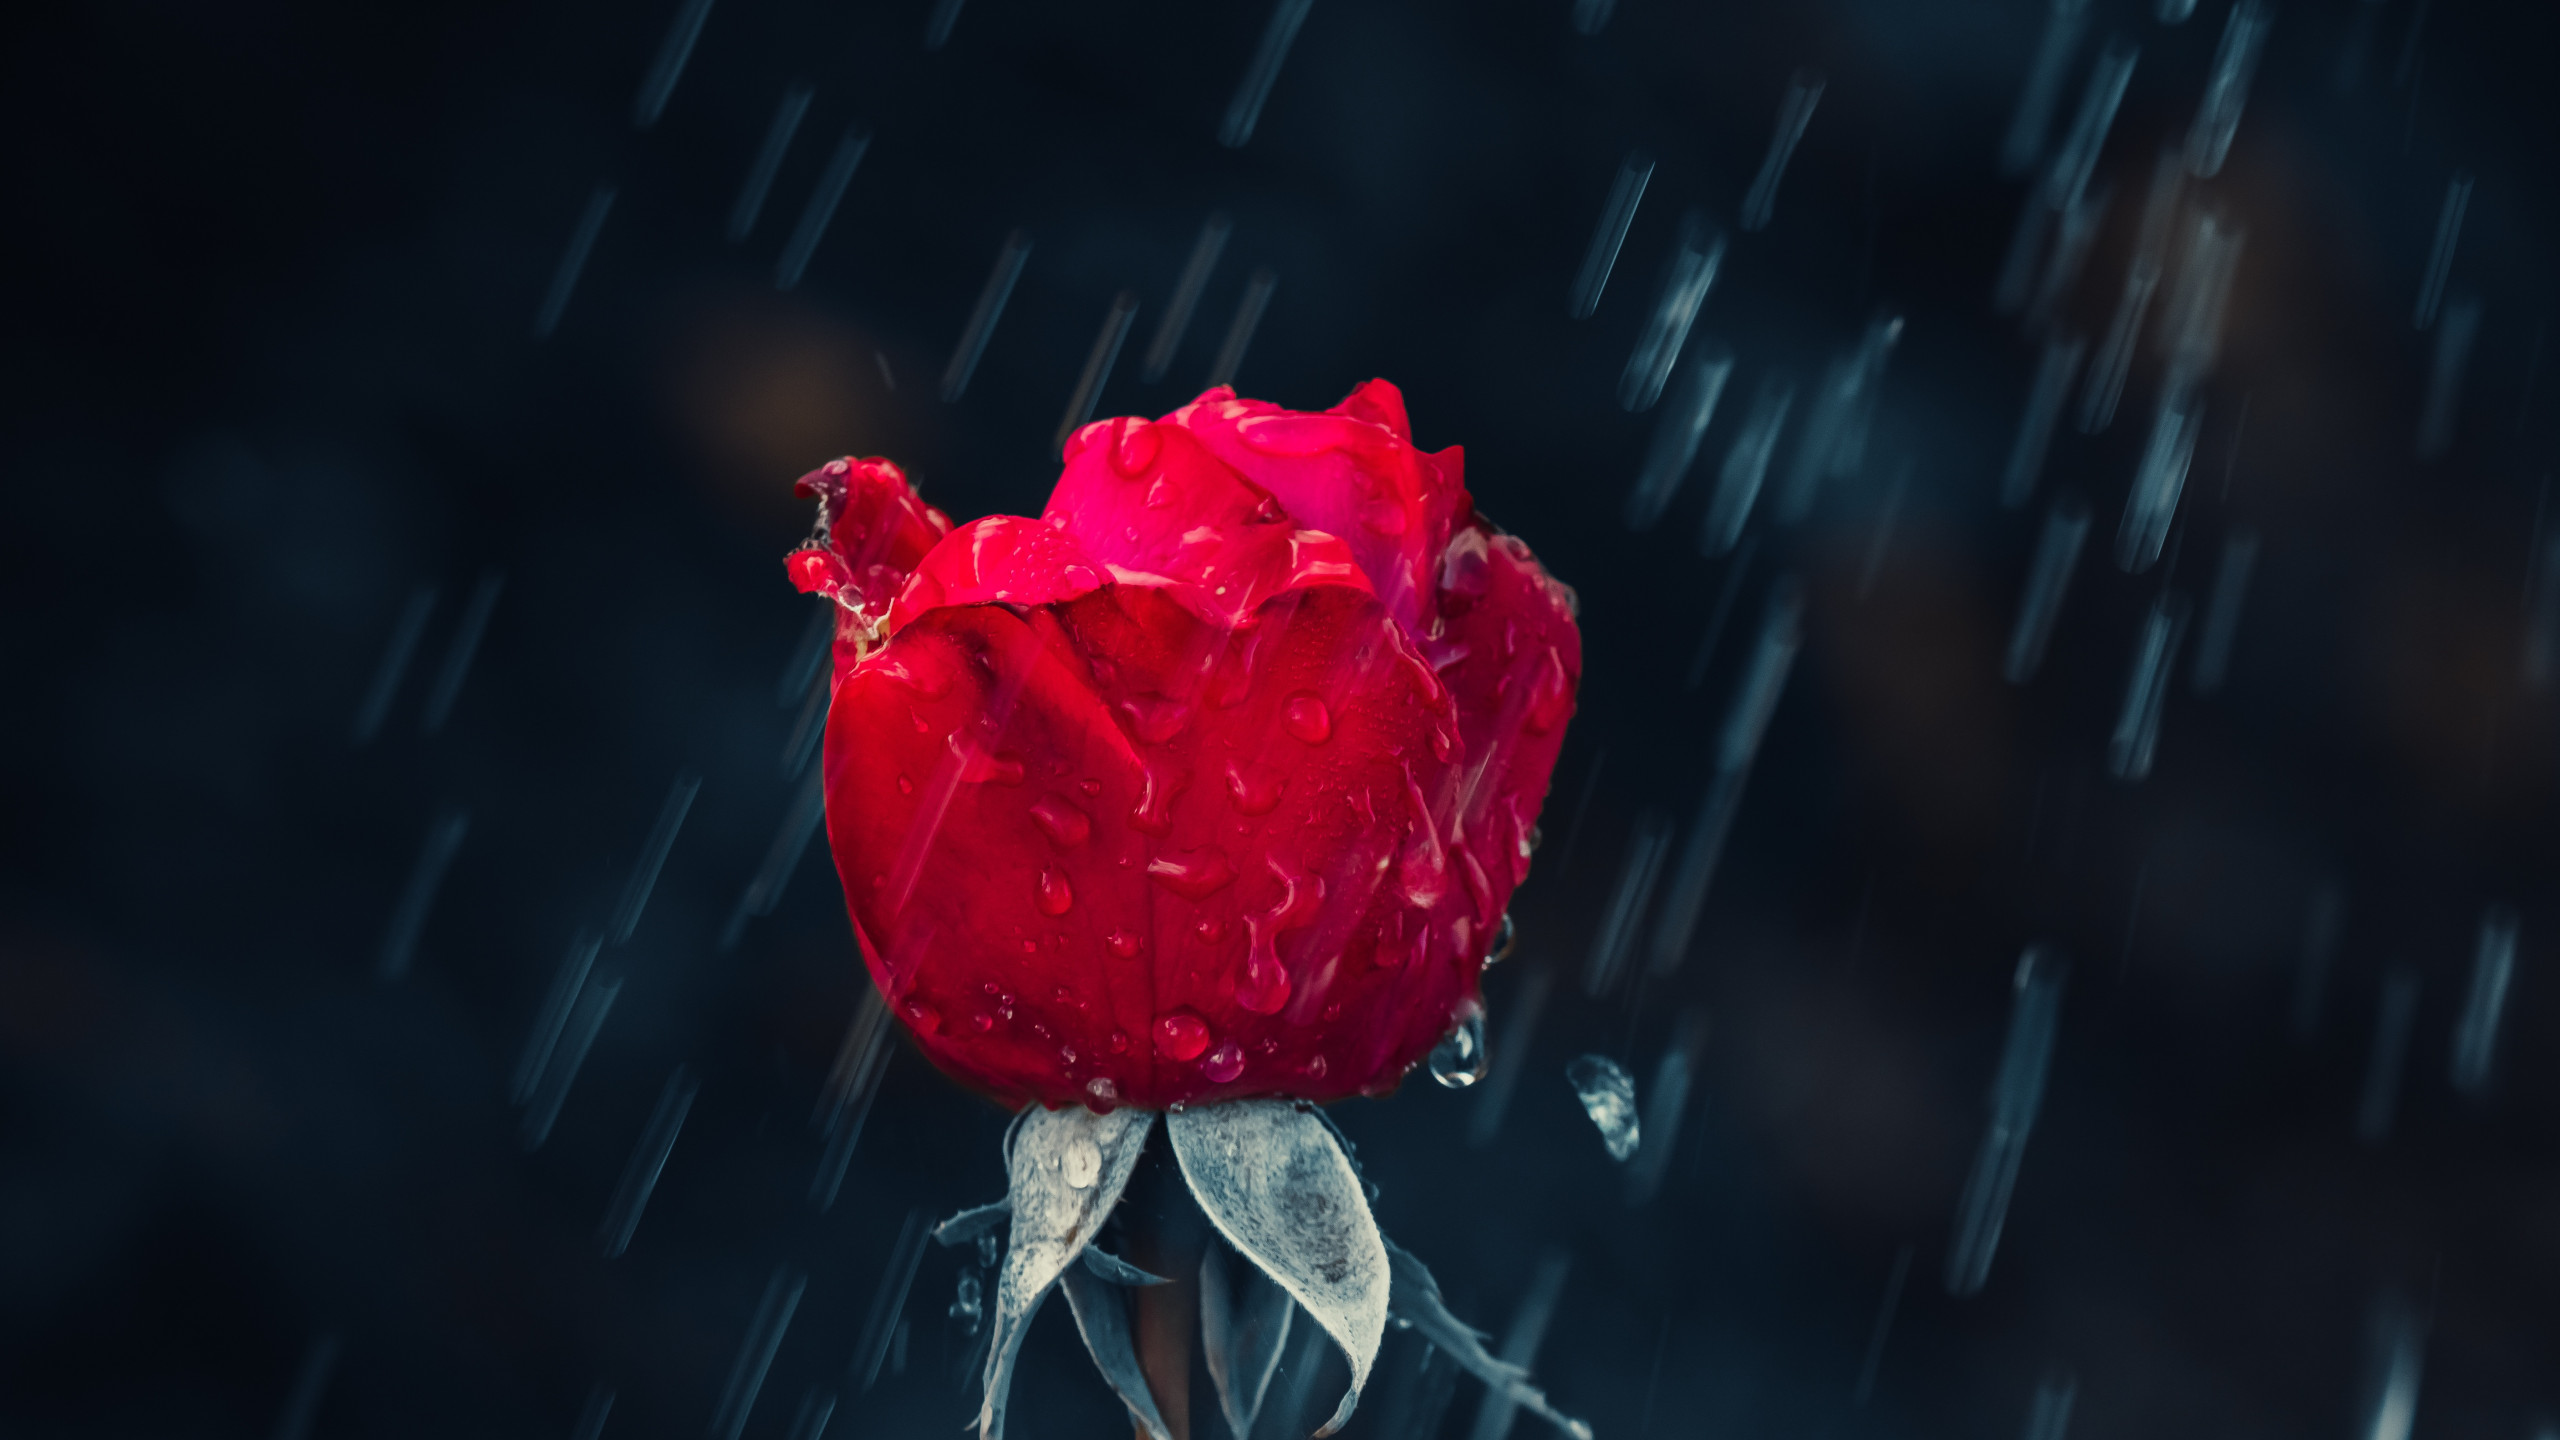 Red rose and raindrops wallpaper 2560x1440